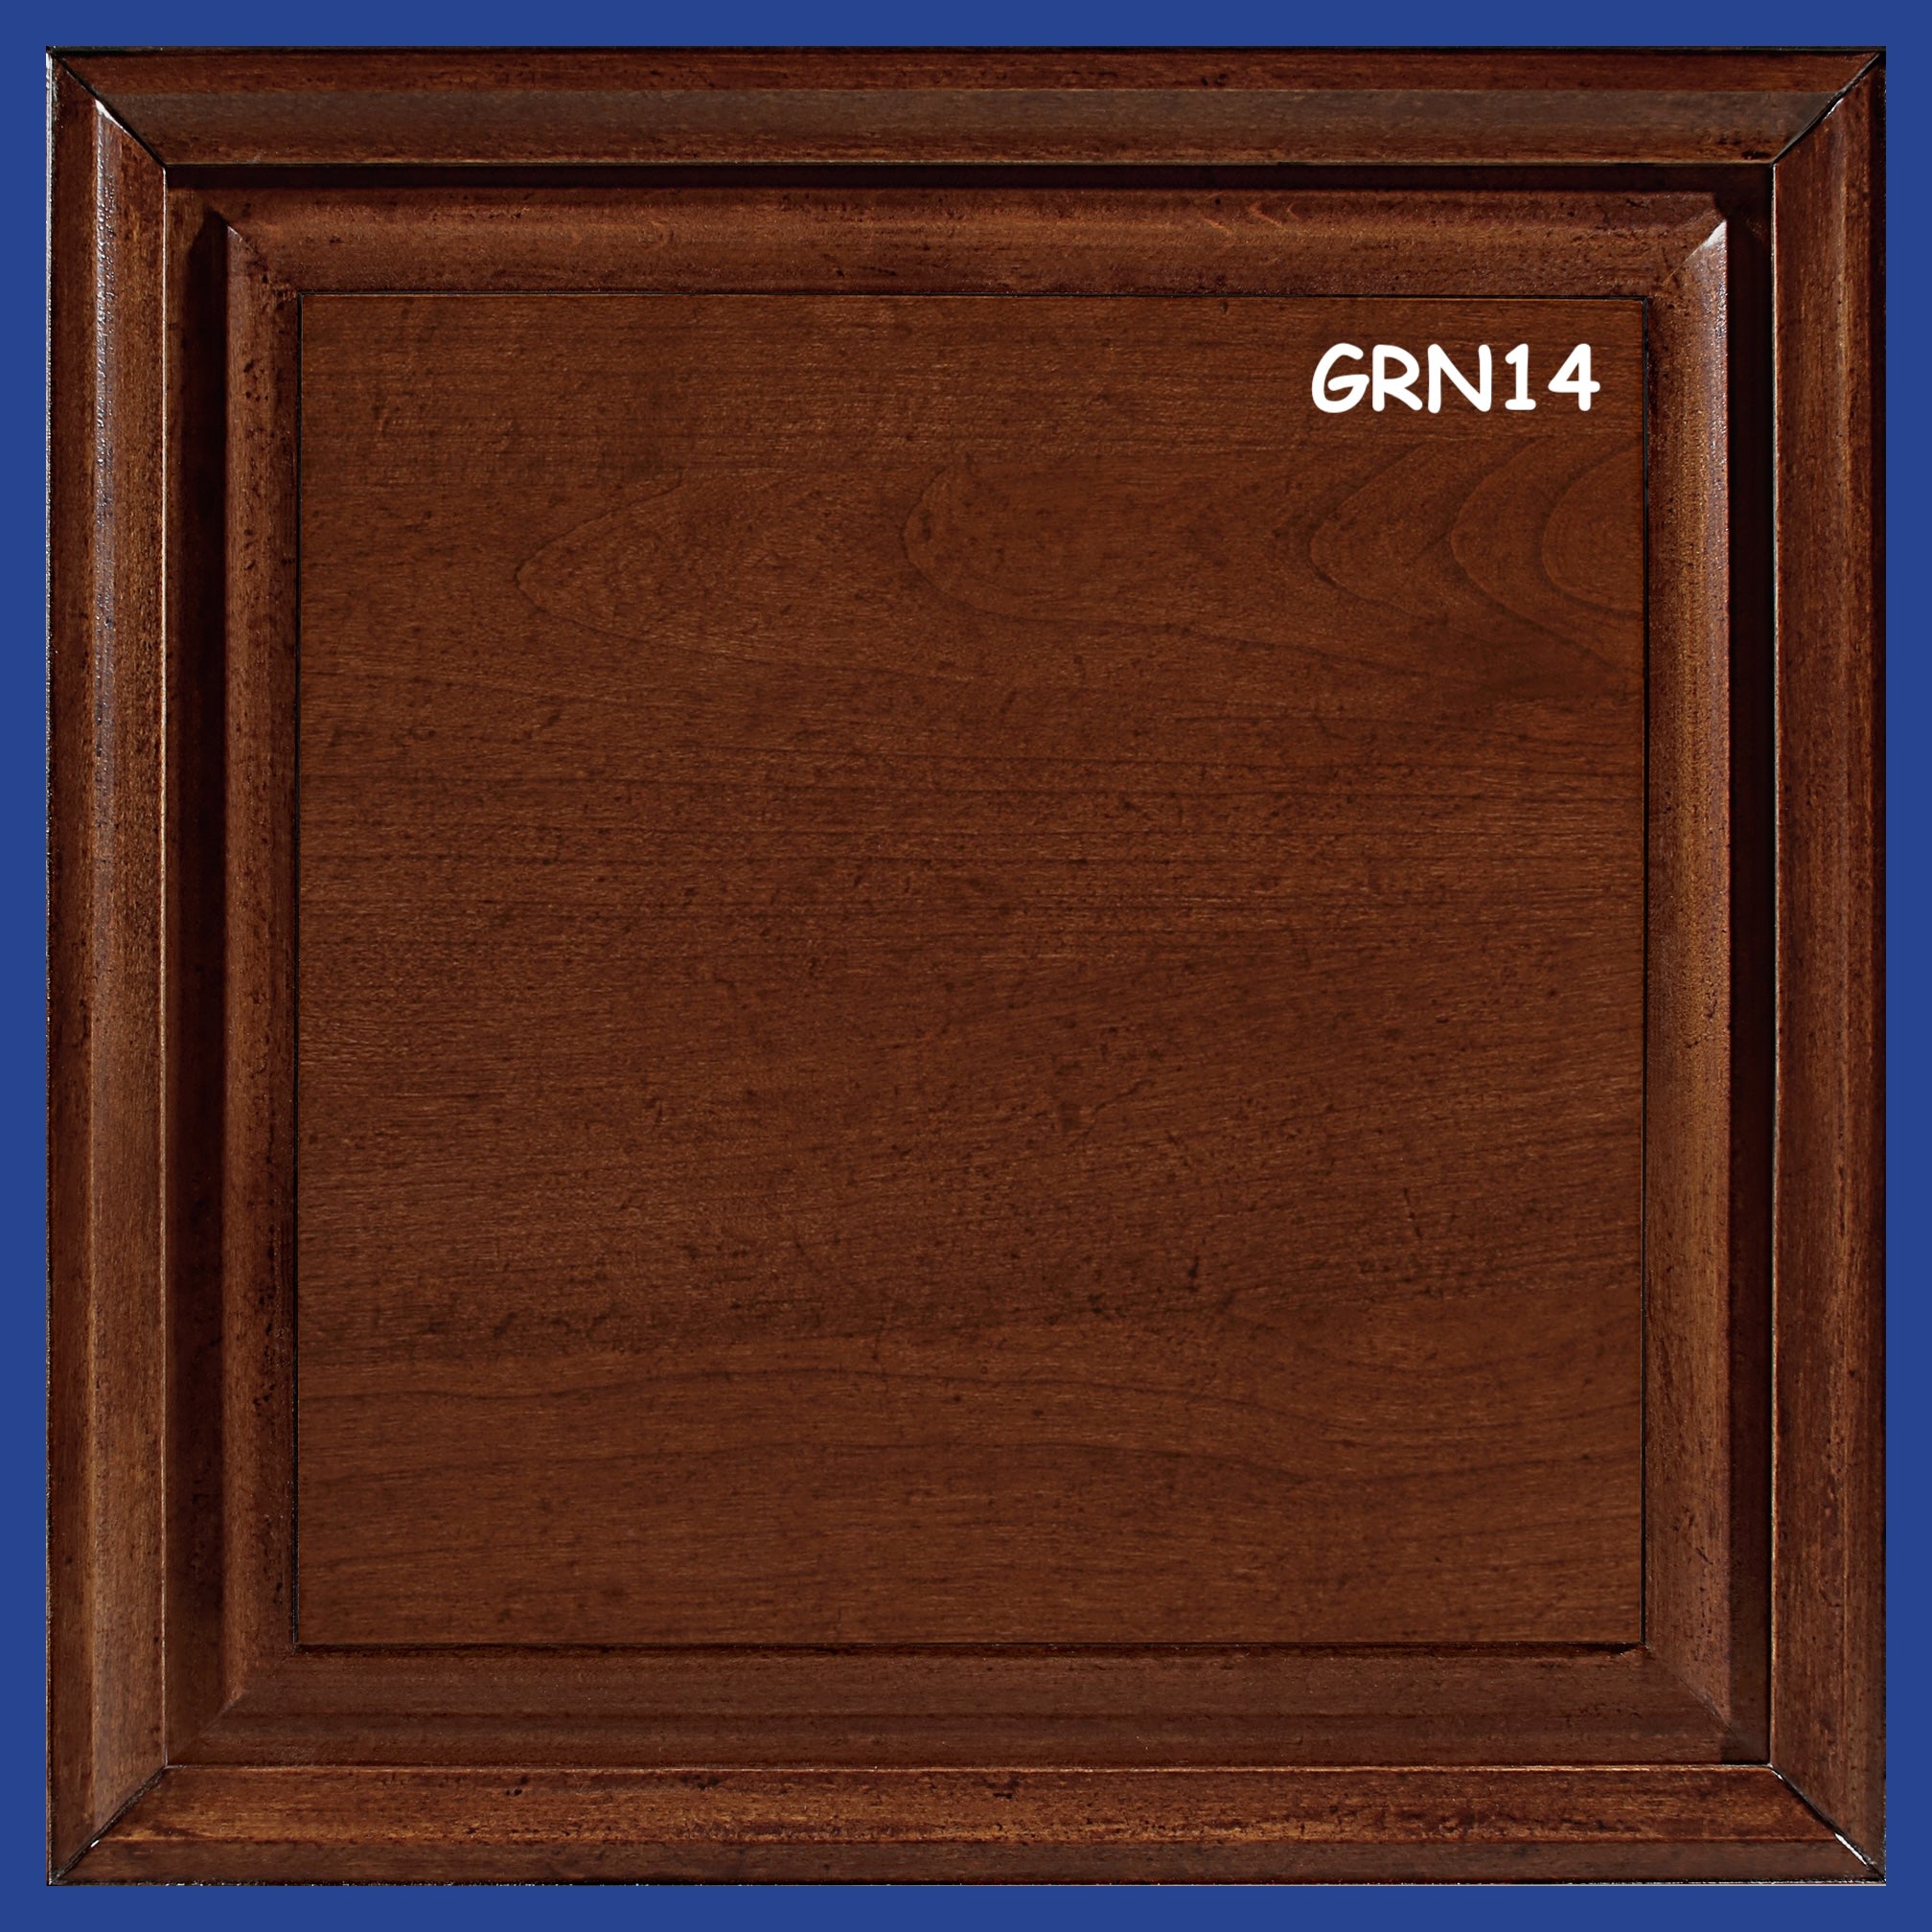 Classic Showcase L 160 in Cherry Wood with Inlay from the Piombini Art Collection